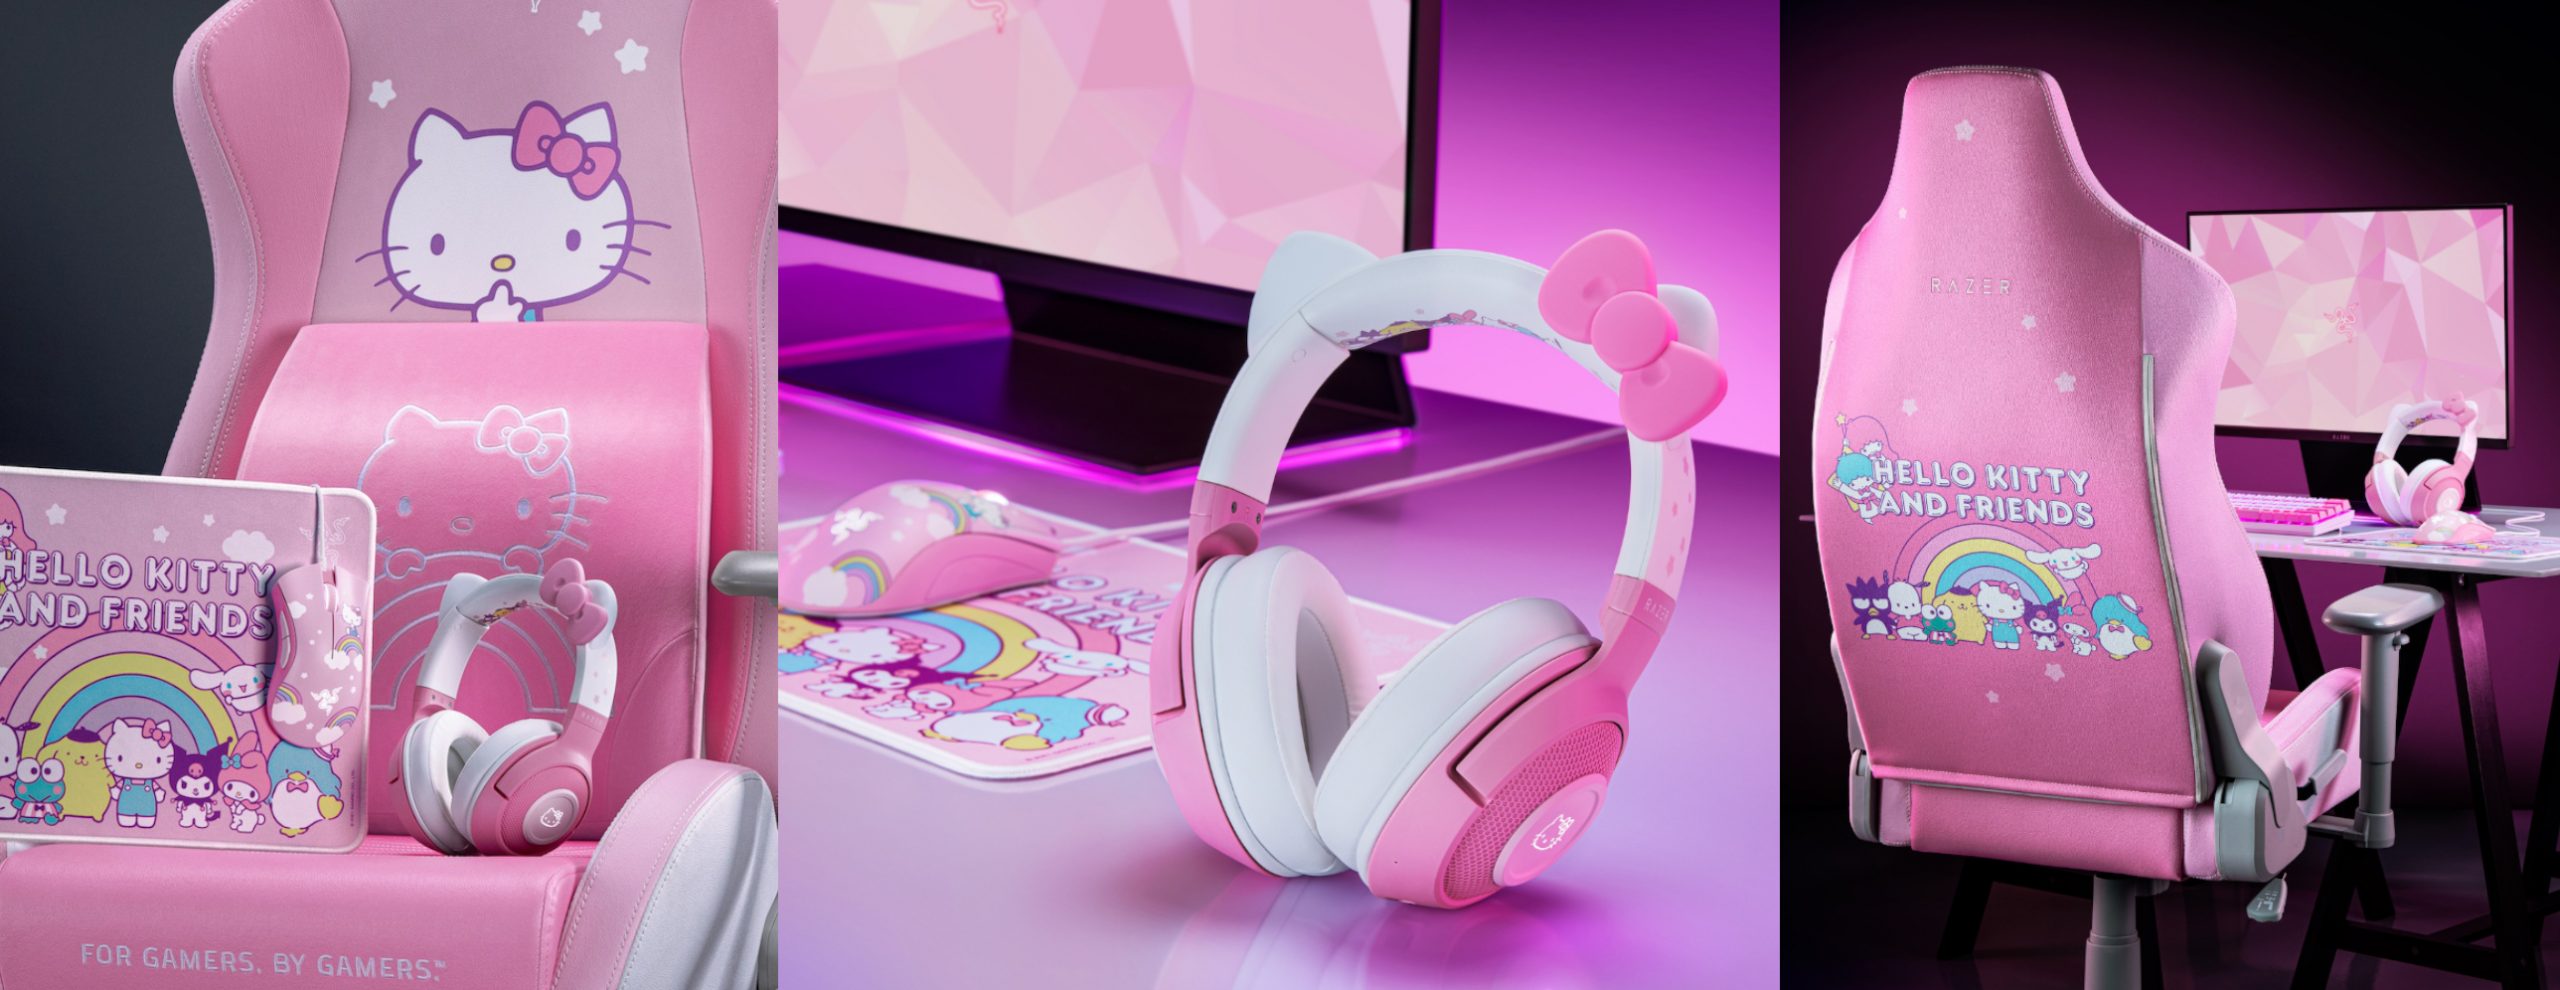 Razer Launches 'Hello Kitty And Friends' Gaming Gear Including